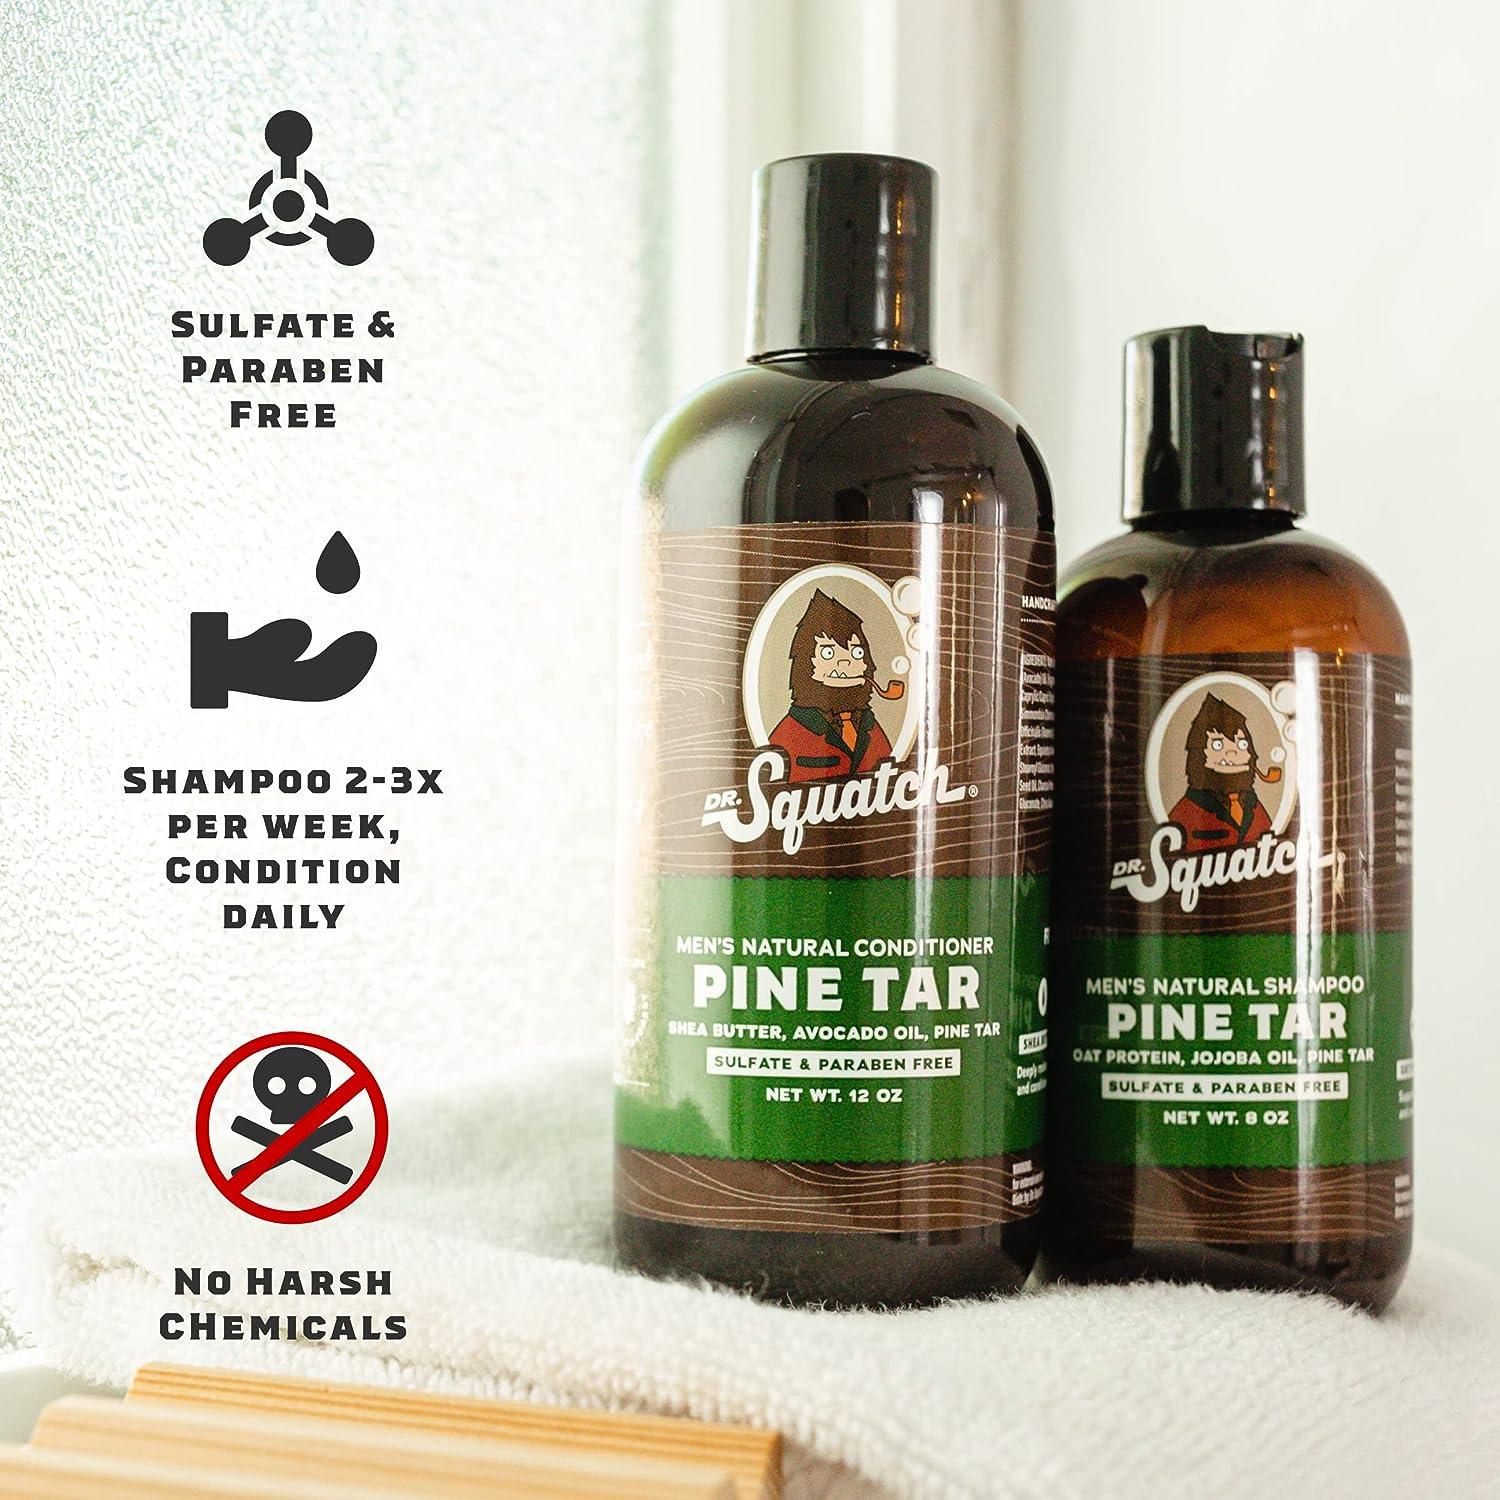 Dr. Squatch Men's Bar Soap and Hair Care BEACH Expanded Pack: Men's Natural  Bar Soap: Coconut Castaw…See more Dr. Squatch Men's Bar Soap and Hair Care